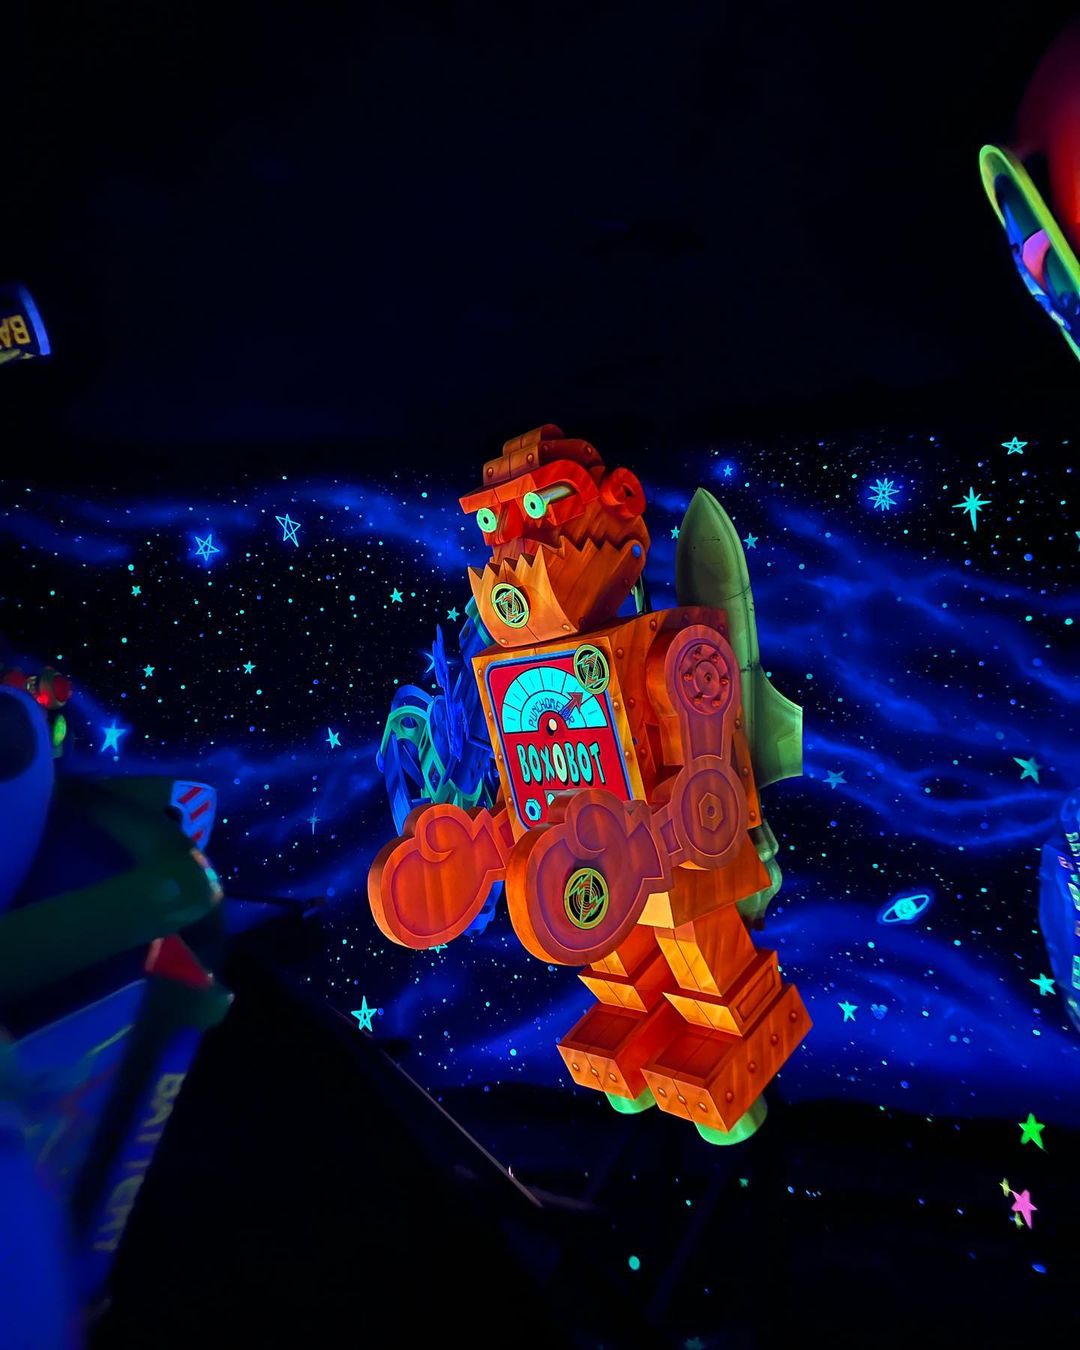 Buzz Lightyear's Space Ranger Spin - Toy Story Attraction at Magic Kingdom